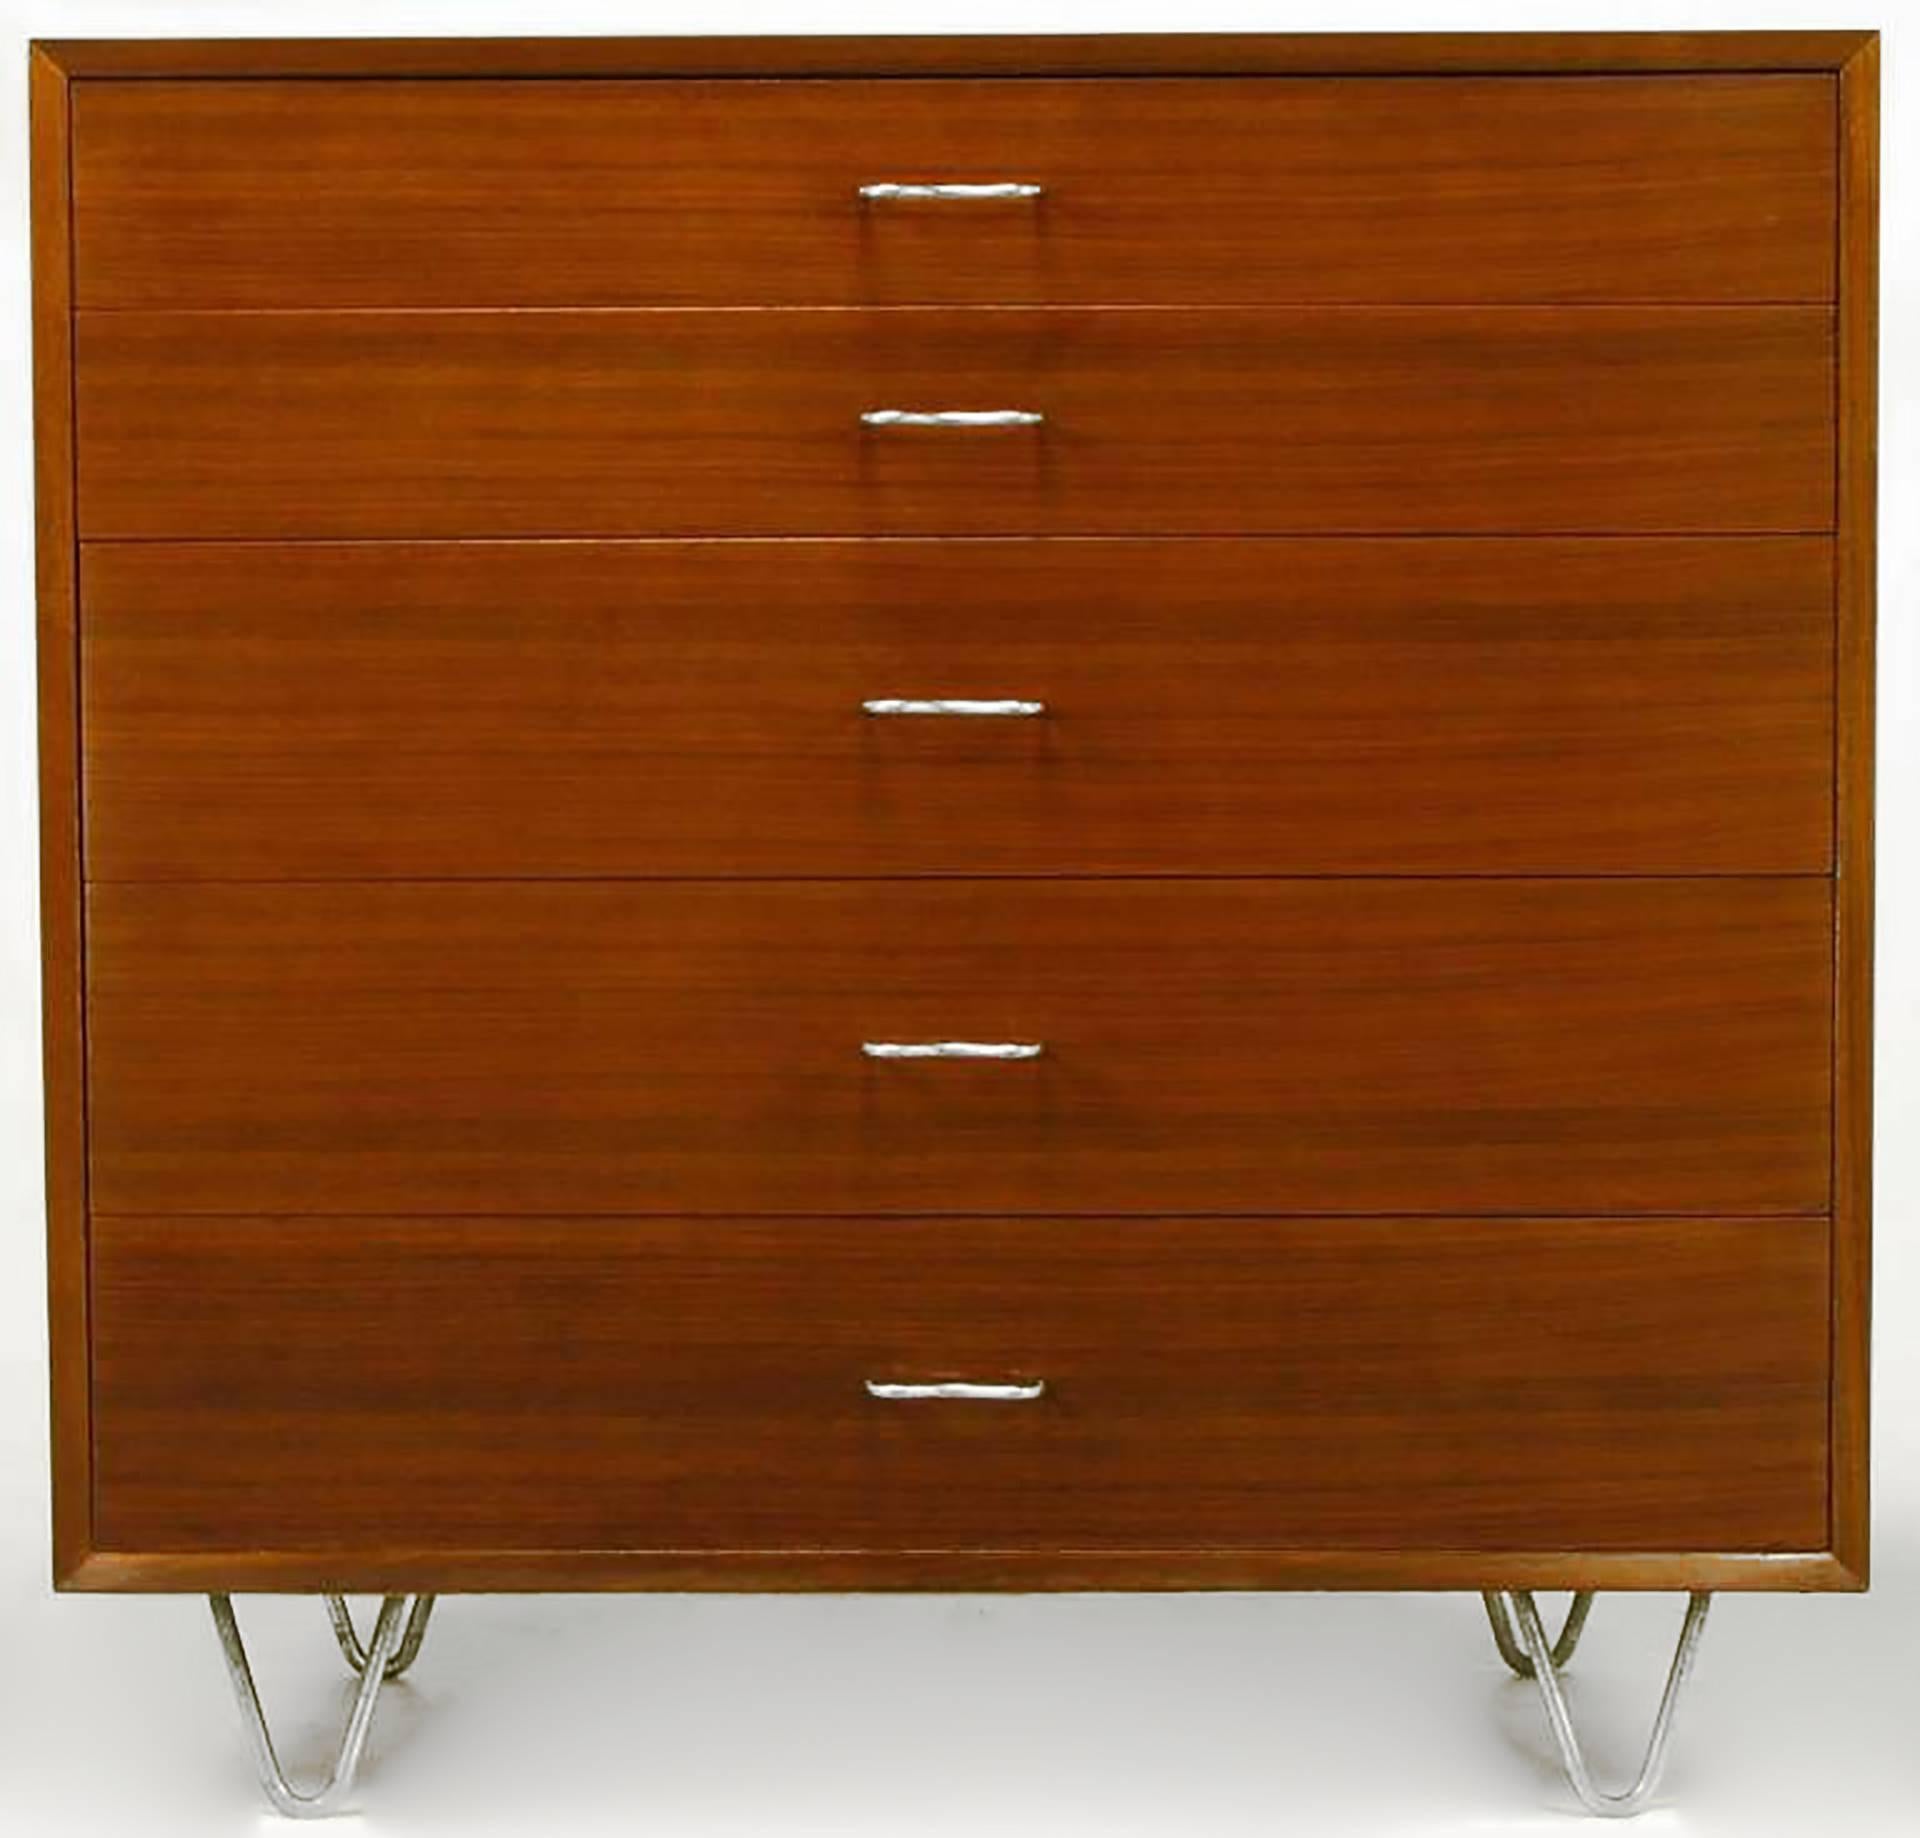 Ribbon mahogany five-drawer dresser by George Nelson for Herman Miller. M-shaped aluminium pulls and hair pin aluminium legs. Top drawer is partitioned as is the third deeper drawer.